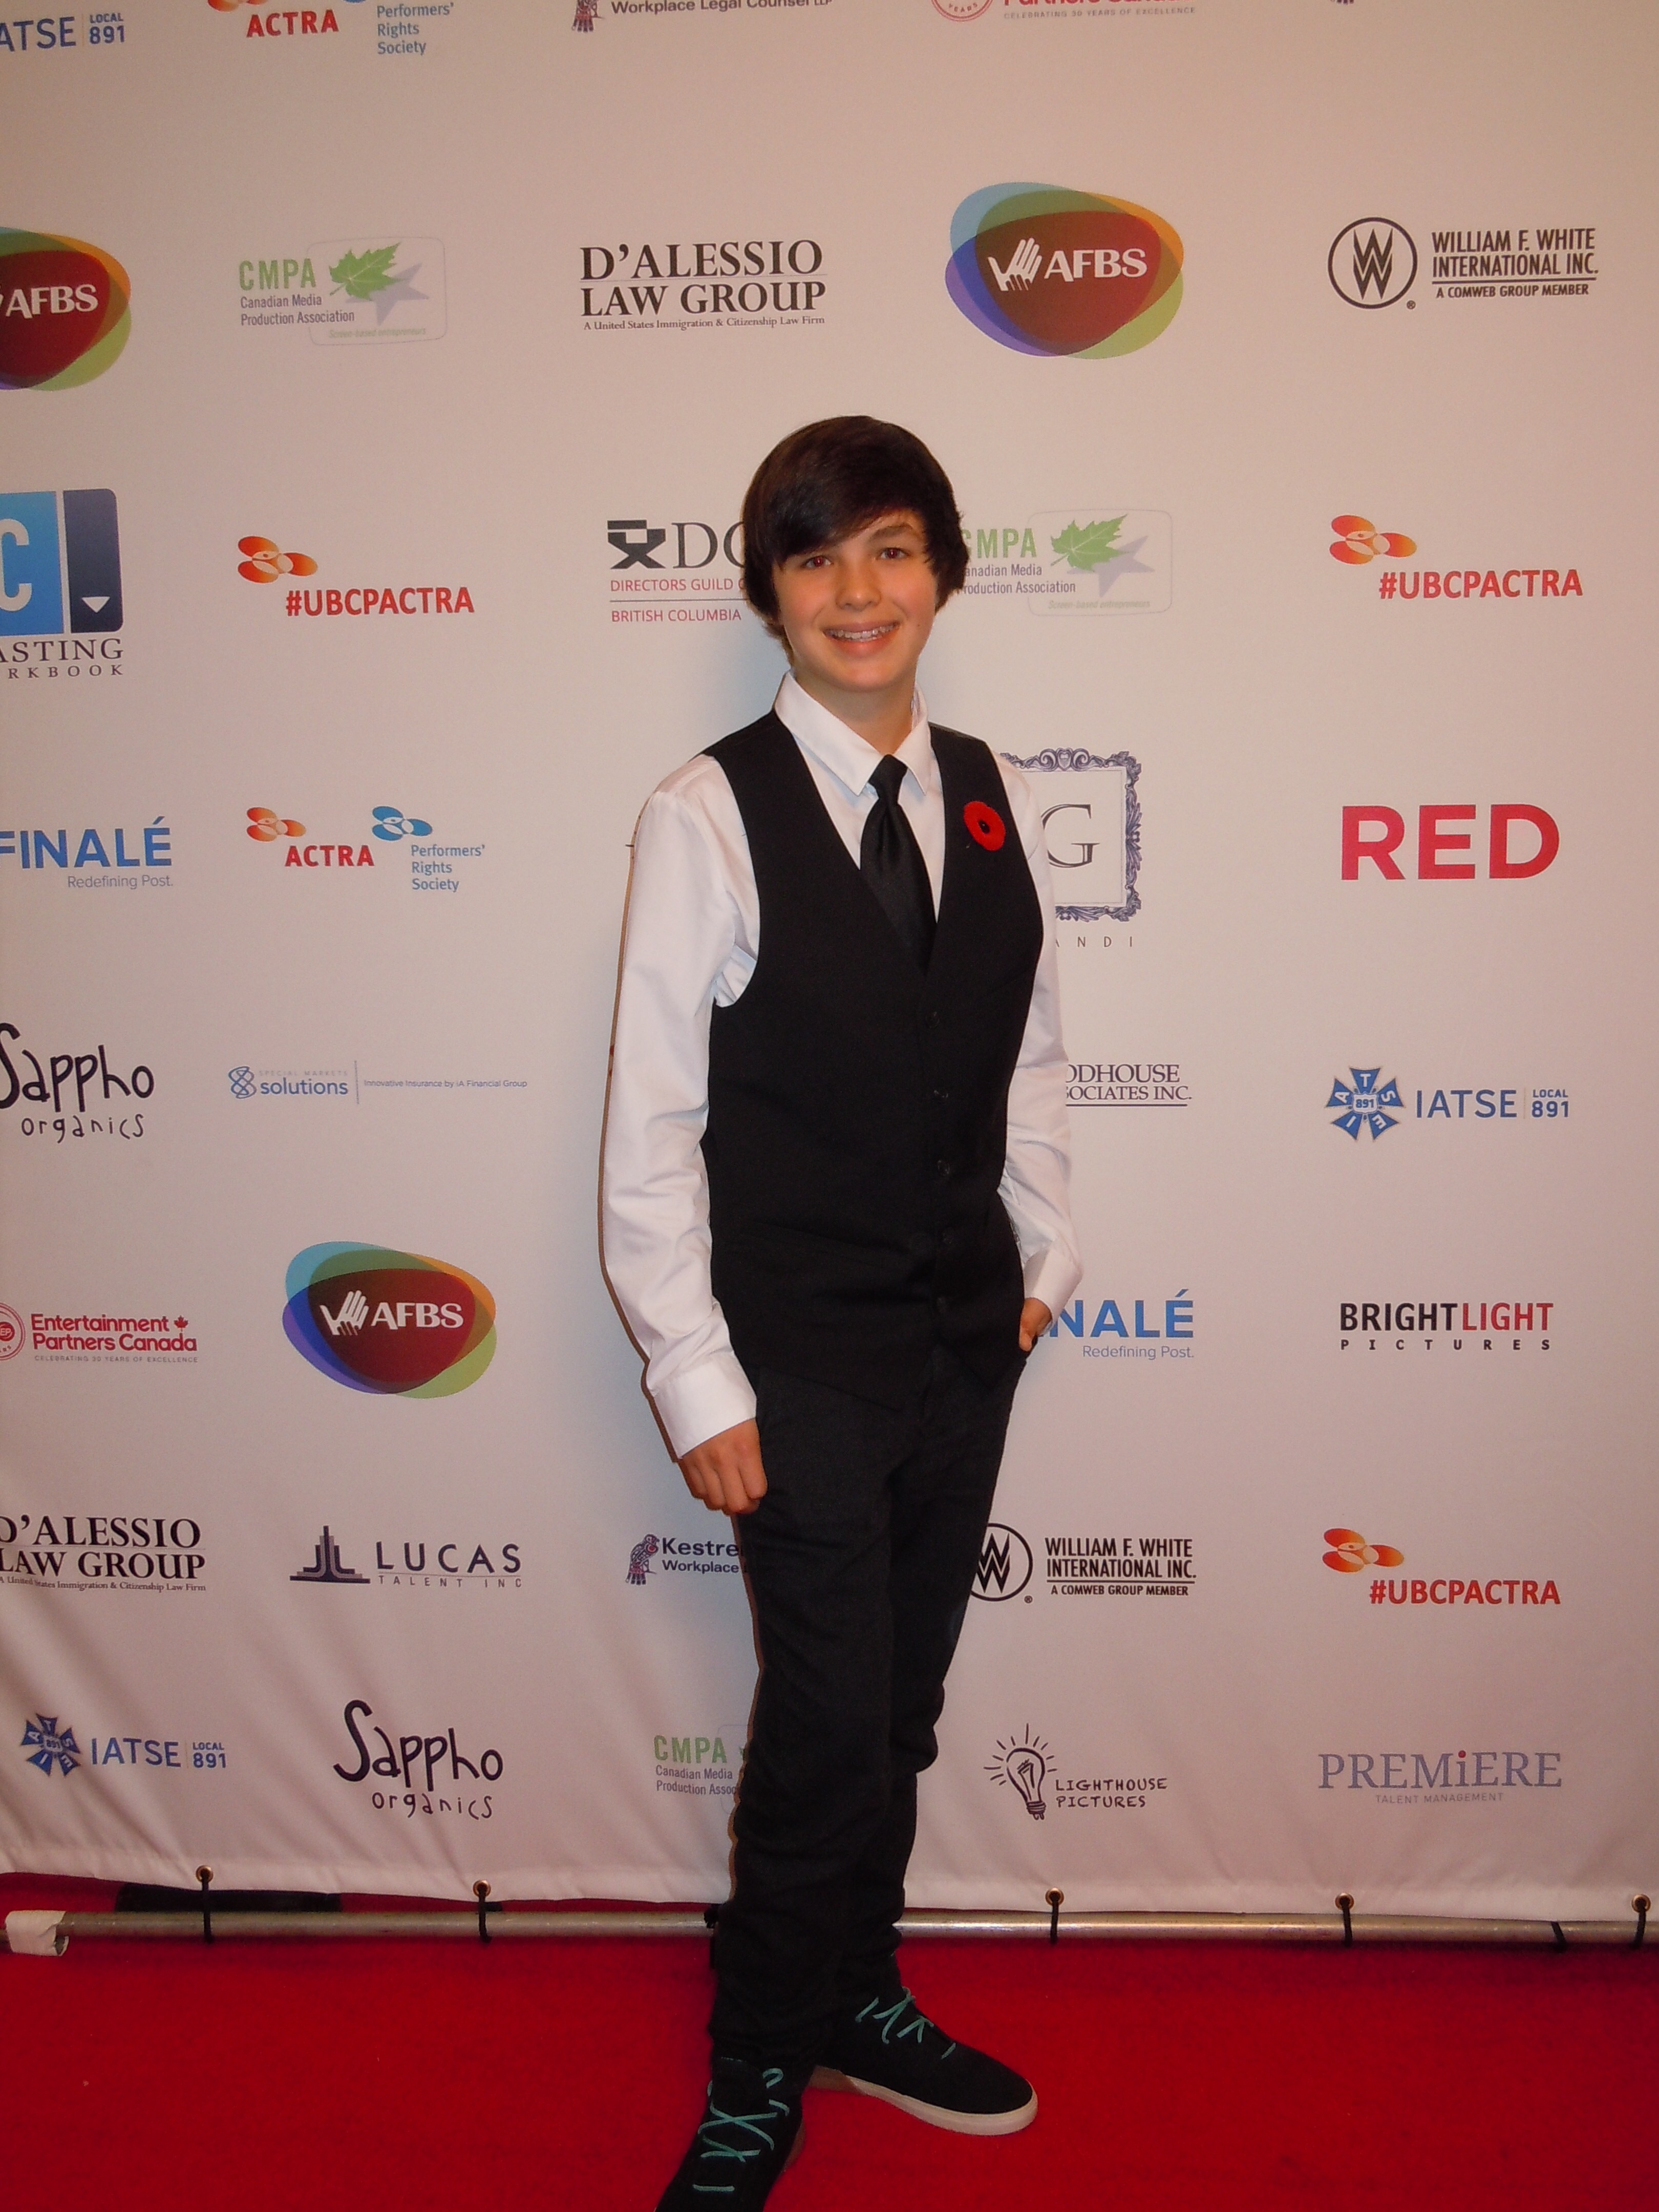 Logan Williams UBCP/ACTRA Award nominee for Best Emerging Performer